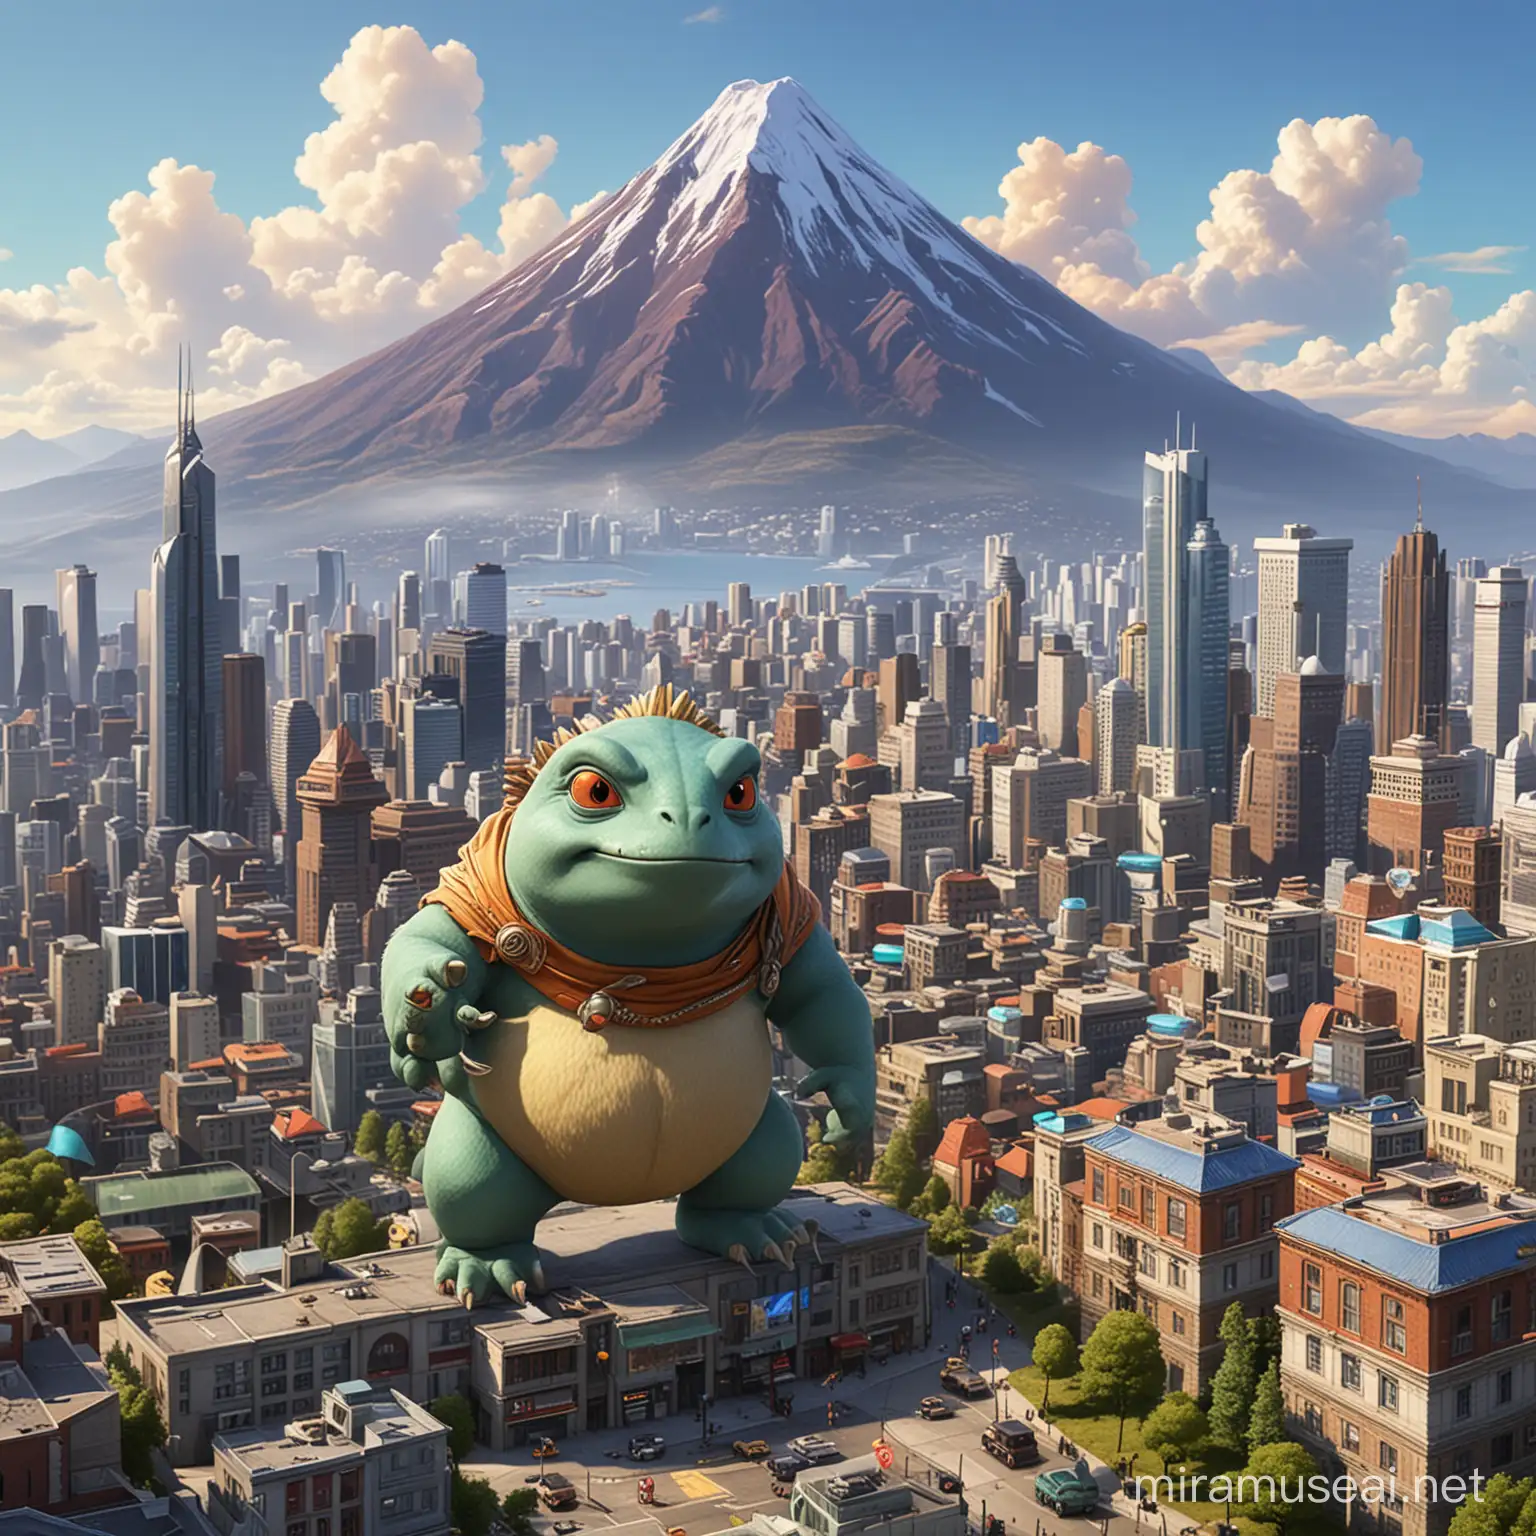 Kuzenbo KING KAPPA,The image is a group of fictional animal characters from a cartoon or animation. It may be related to a PC game, adventure game, or video game software.The image depicts a city with a mountain in the background. The cityscape includes buildings and skyscrapers, with a stratovolcano towering in the distance. The skyline showcases the mix of urban and natural elements in the landscape.Jewelry,  Necklace, Rings and earrings